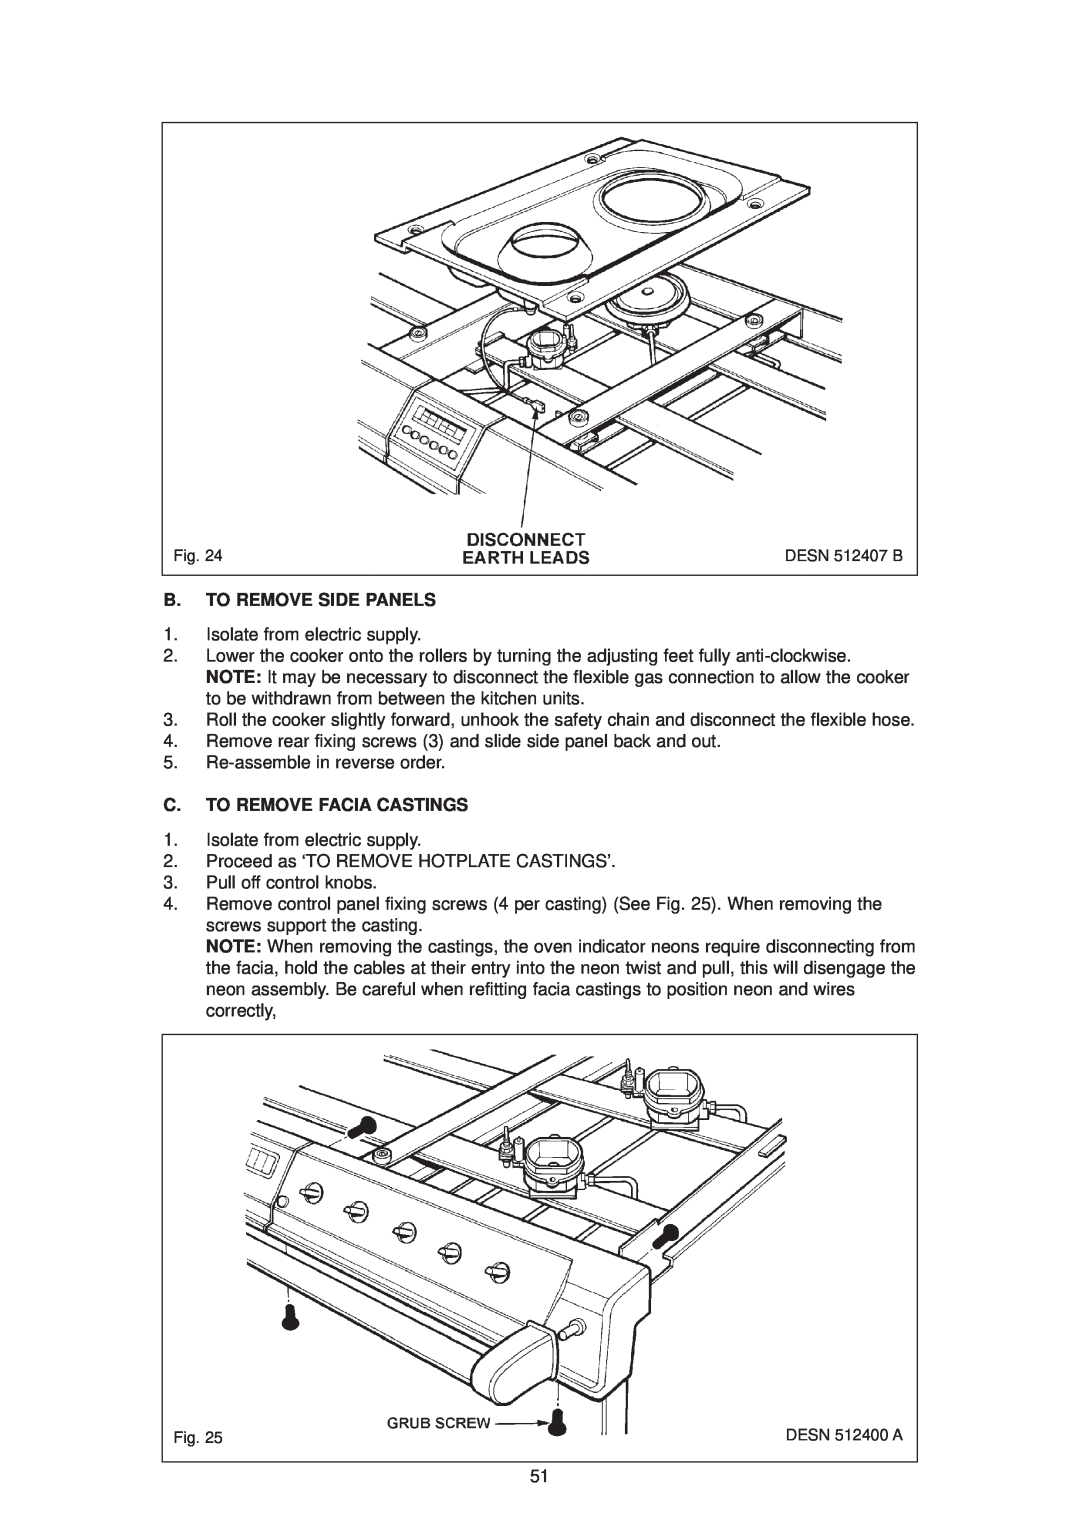 Aga Ranges dc6 owner manual B. To Remove Side Panels, C. To Remove Facia Castings, DESN 512407 B 